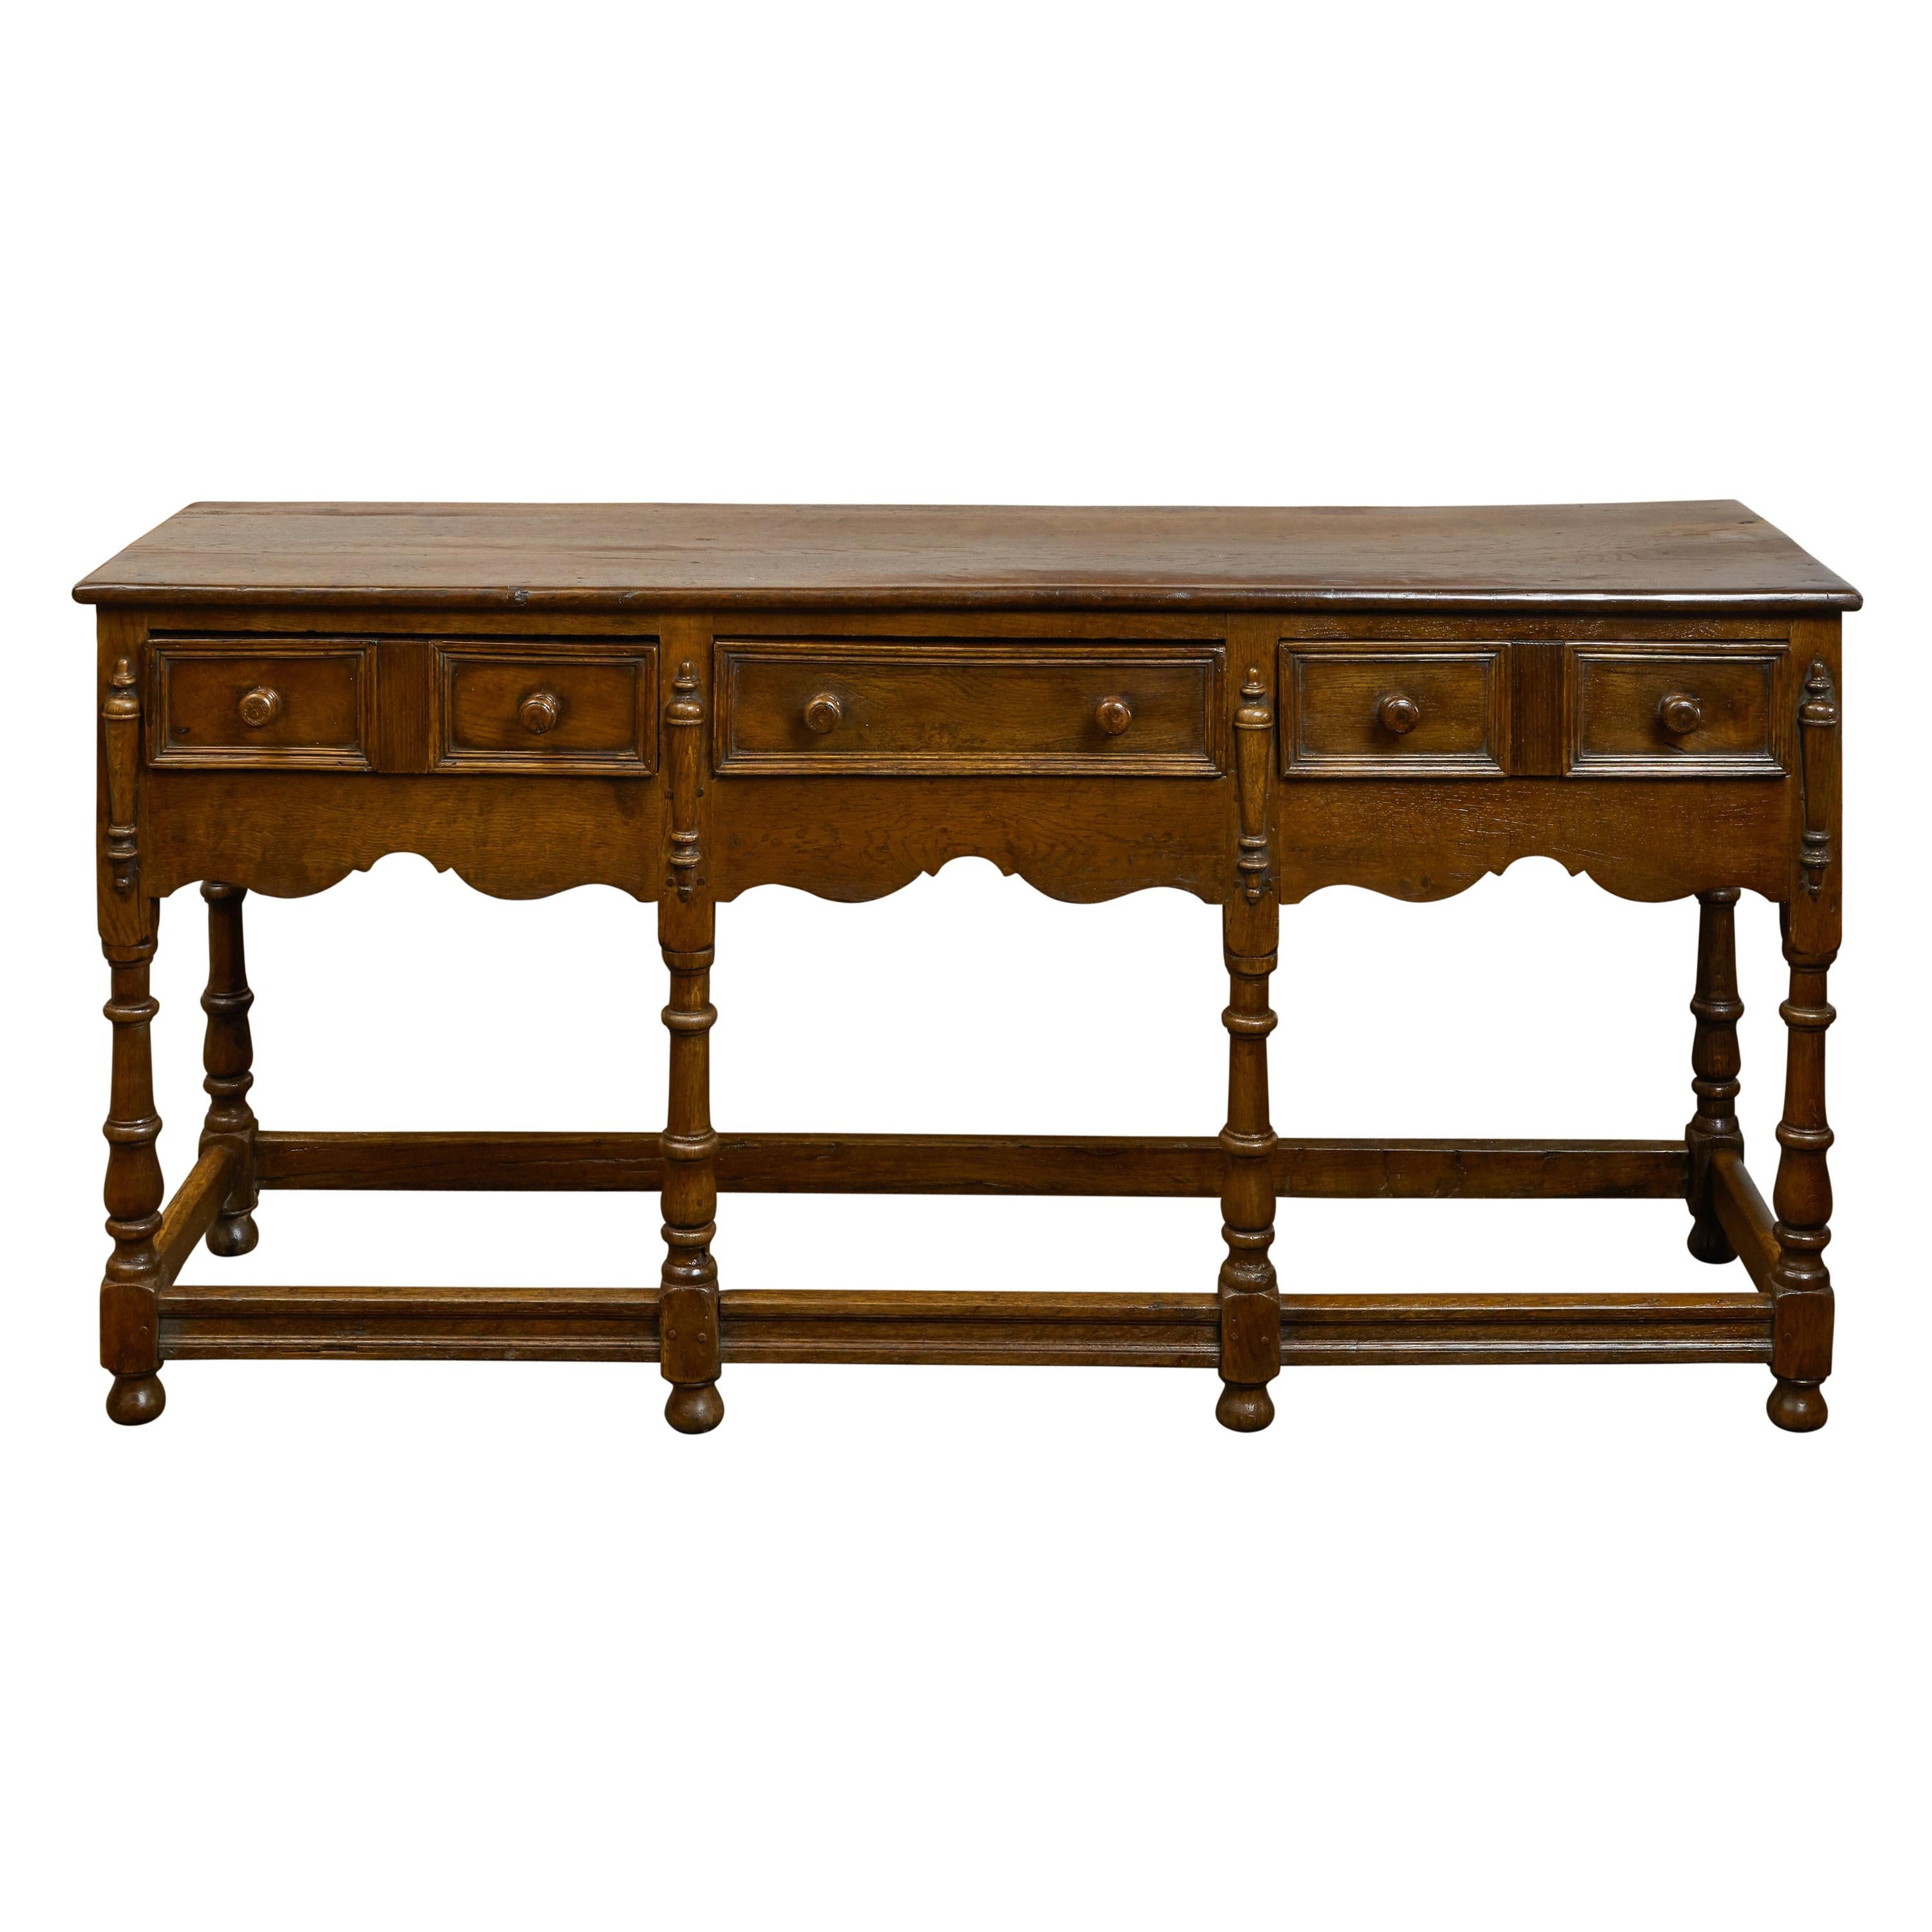 English 1860s Oak Dresser Base with Drawers, Scalloped Apron and Turned Legs